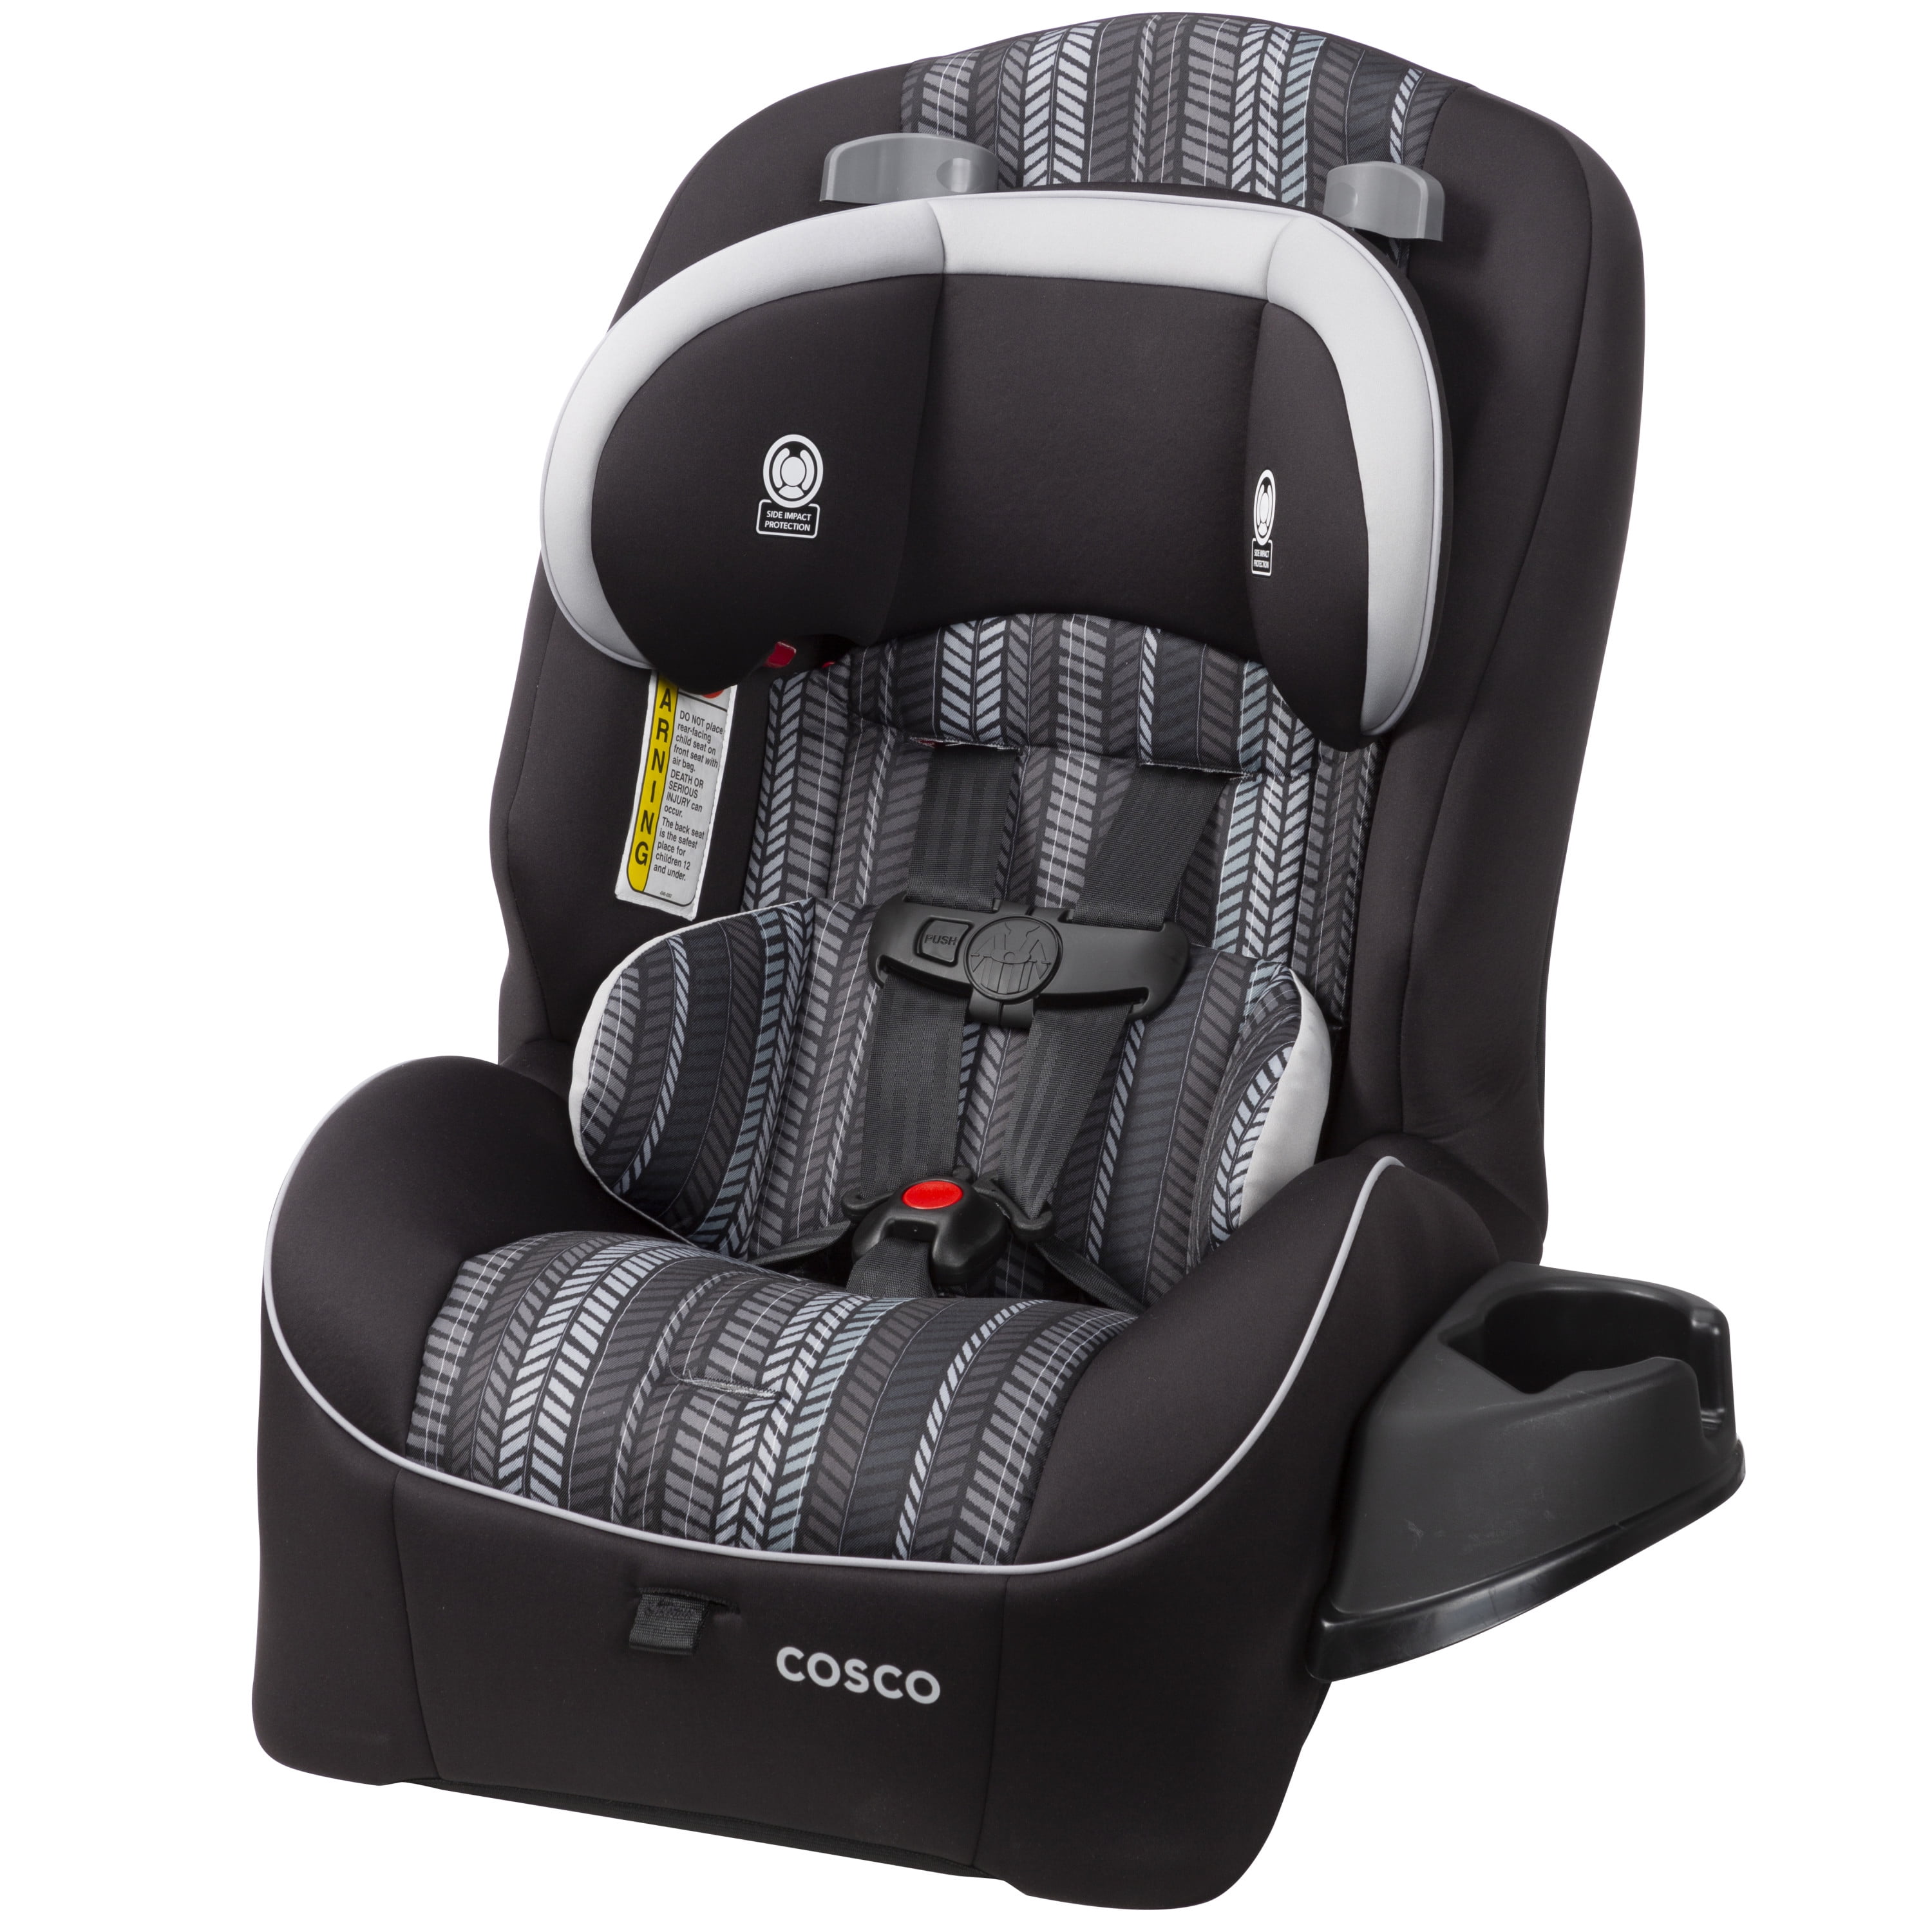 Cybex Eternis S All-in-One Convertible Car Seat, Denim Blue 